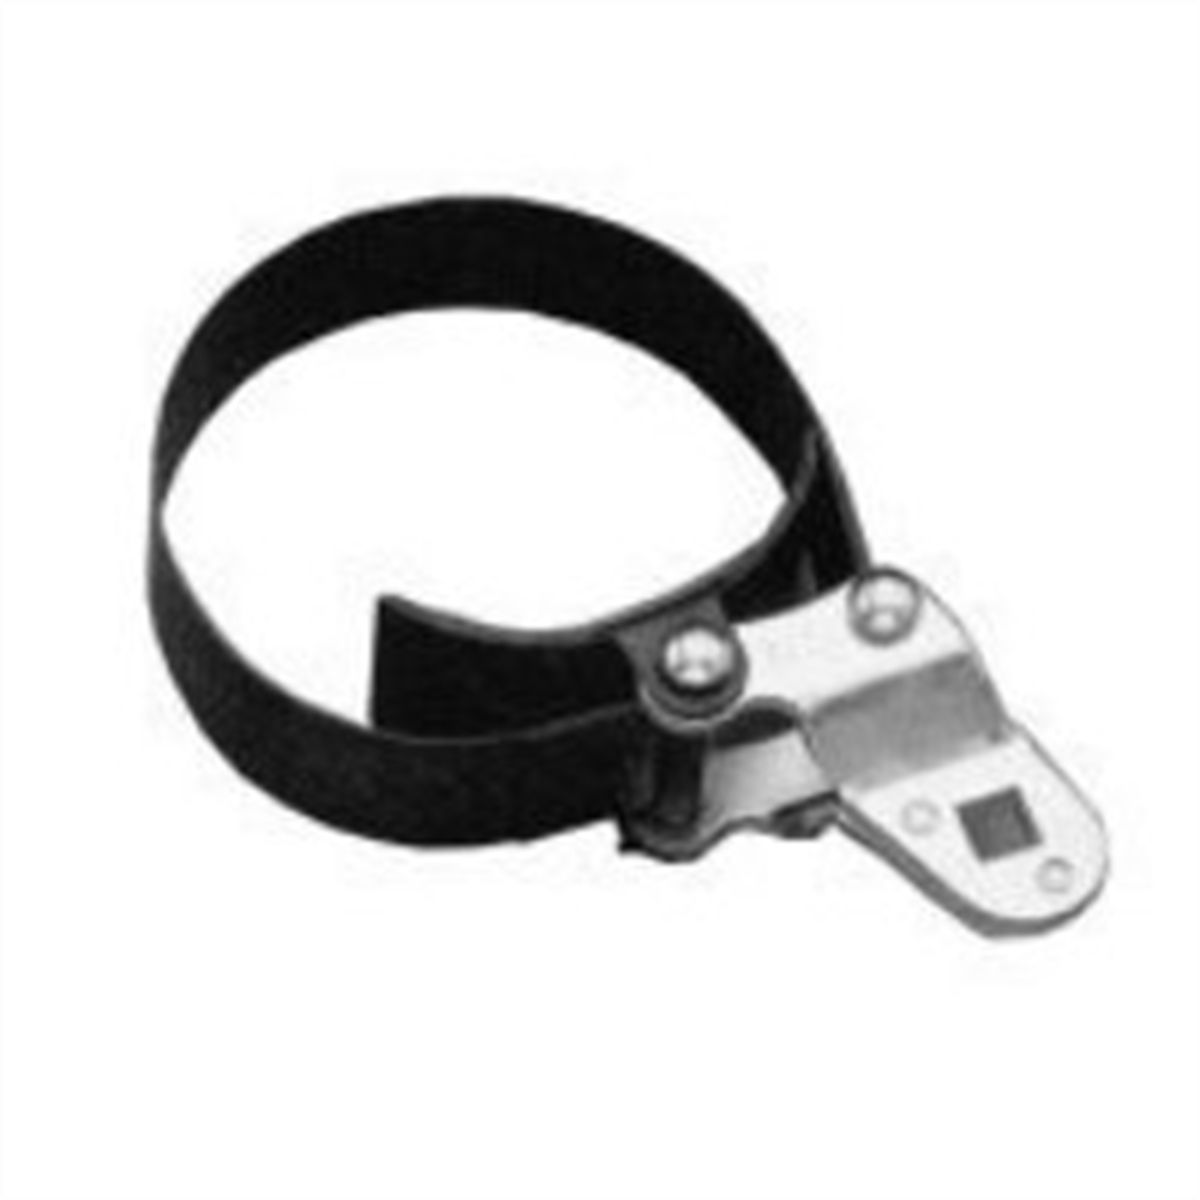 3/8 & 1/2 Drive Heavy-Duty Oil Filter Strap Wrench